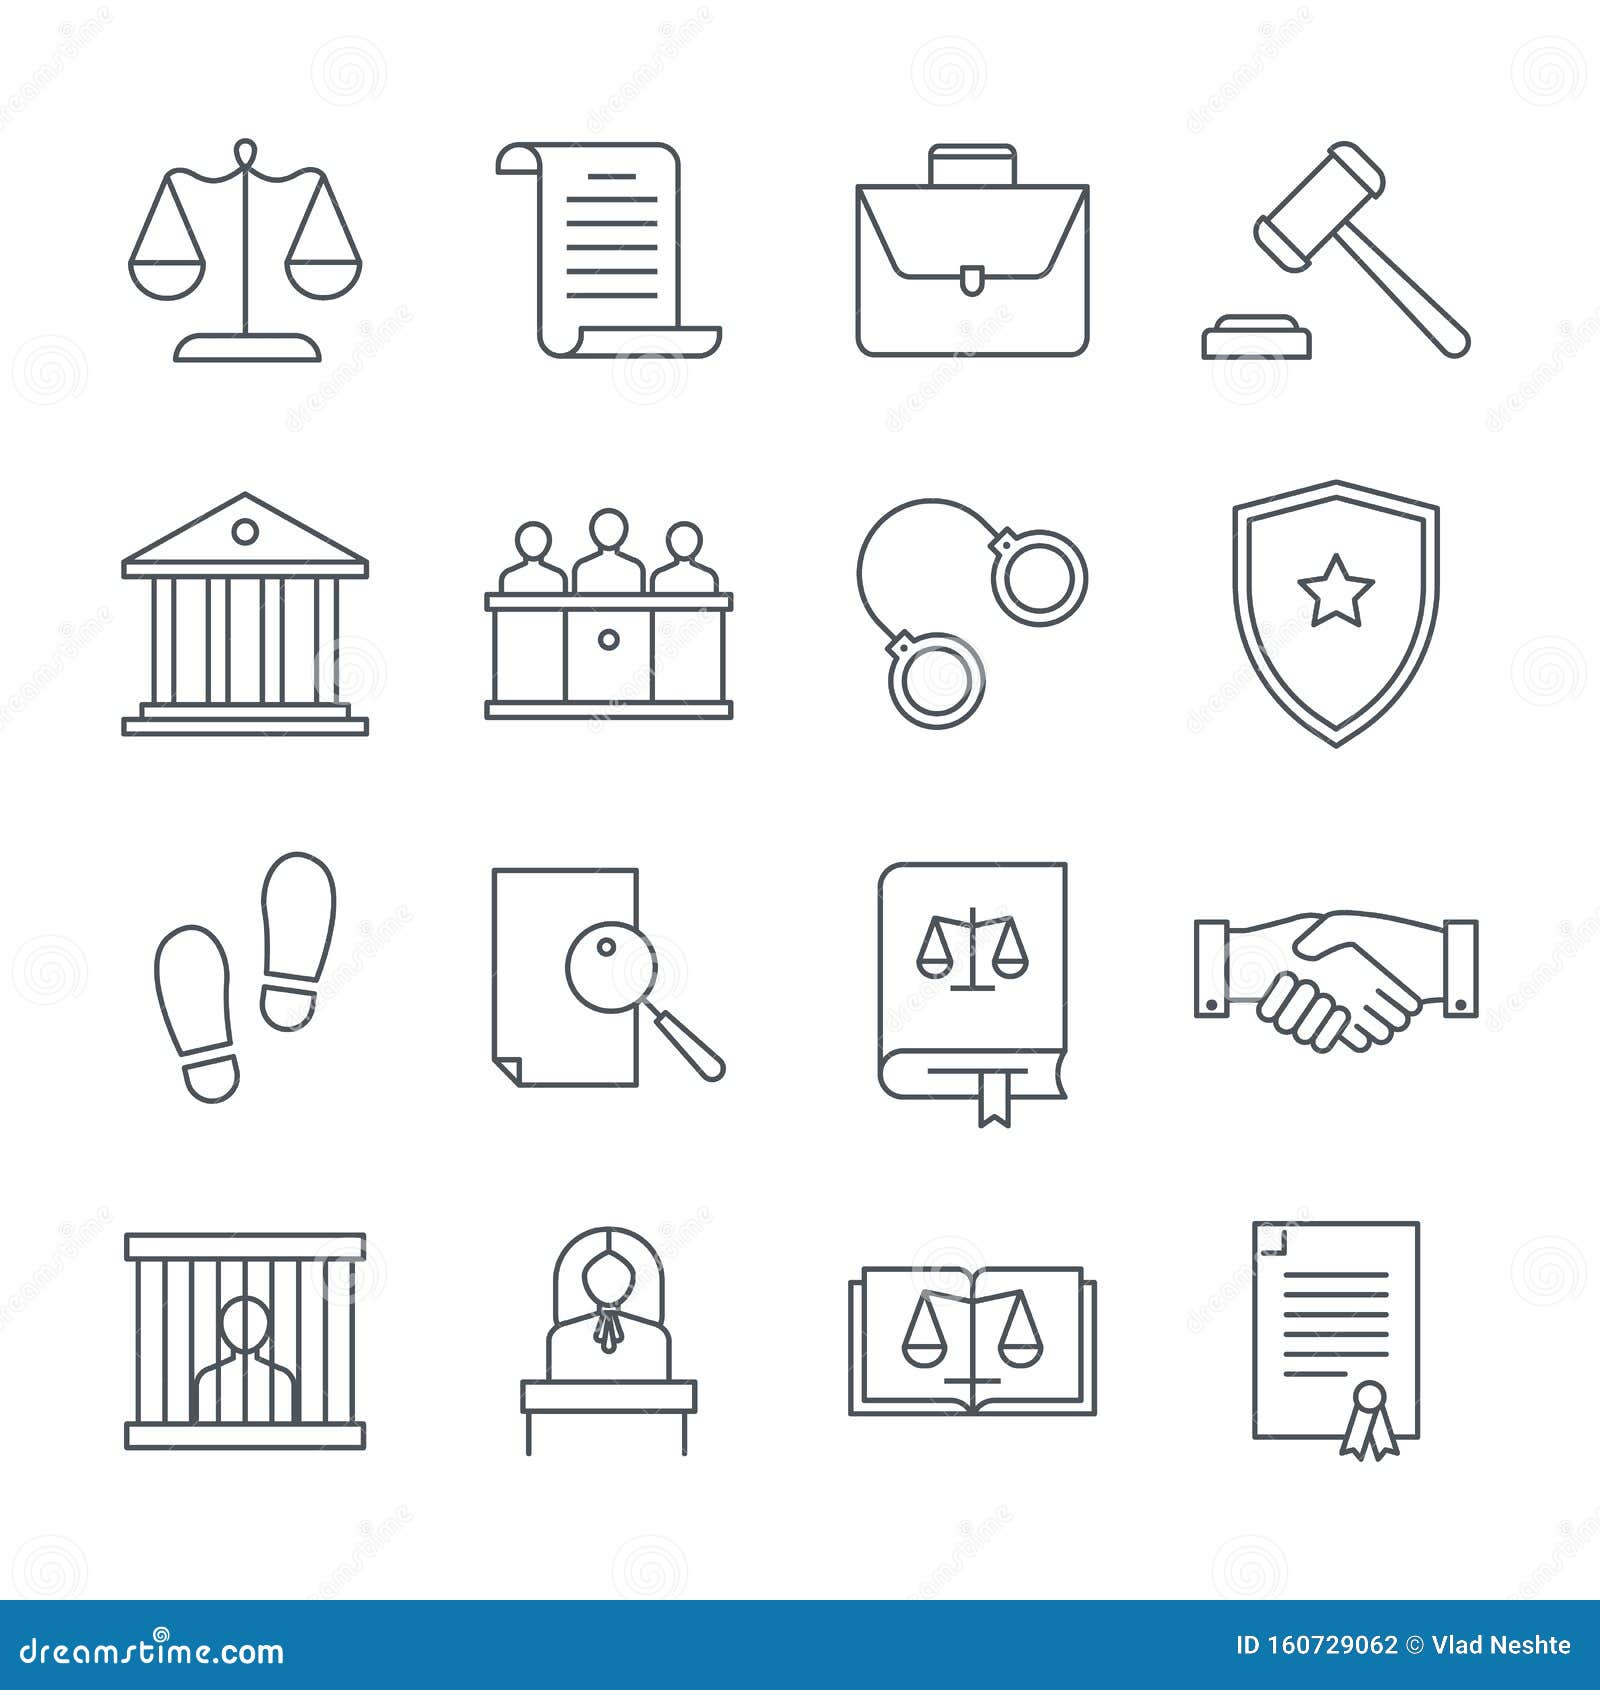 lawyer and law linear icons set. consideration of petitions, declarations, investigation of cases, legalization of